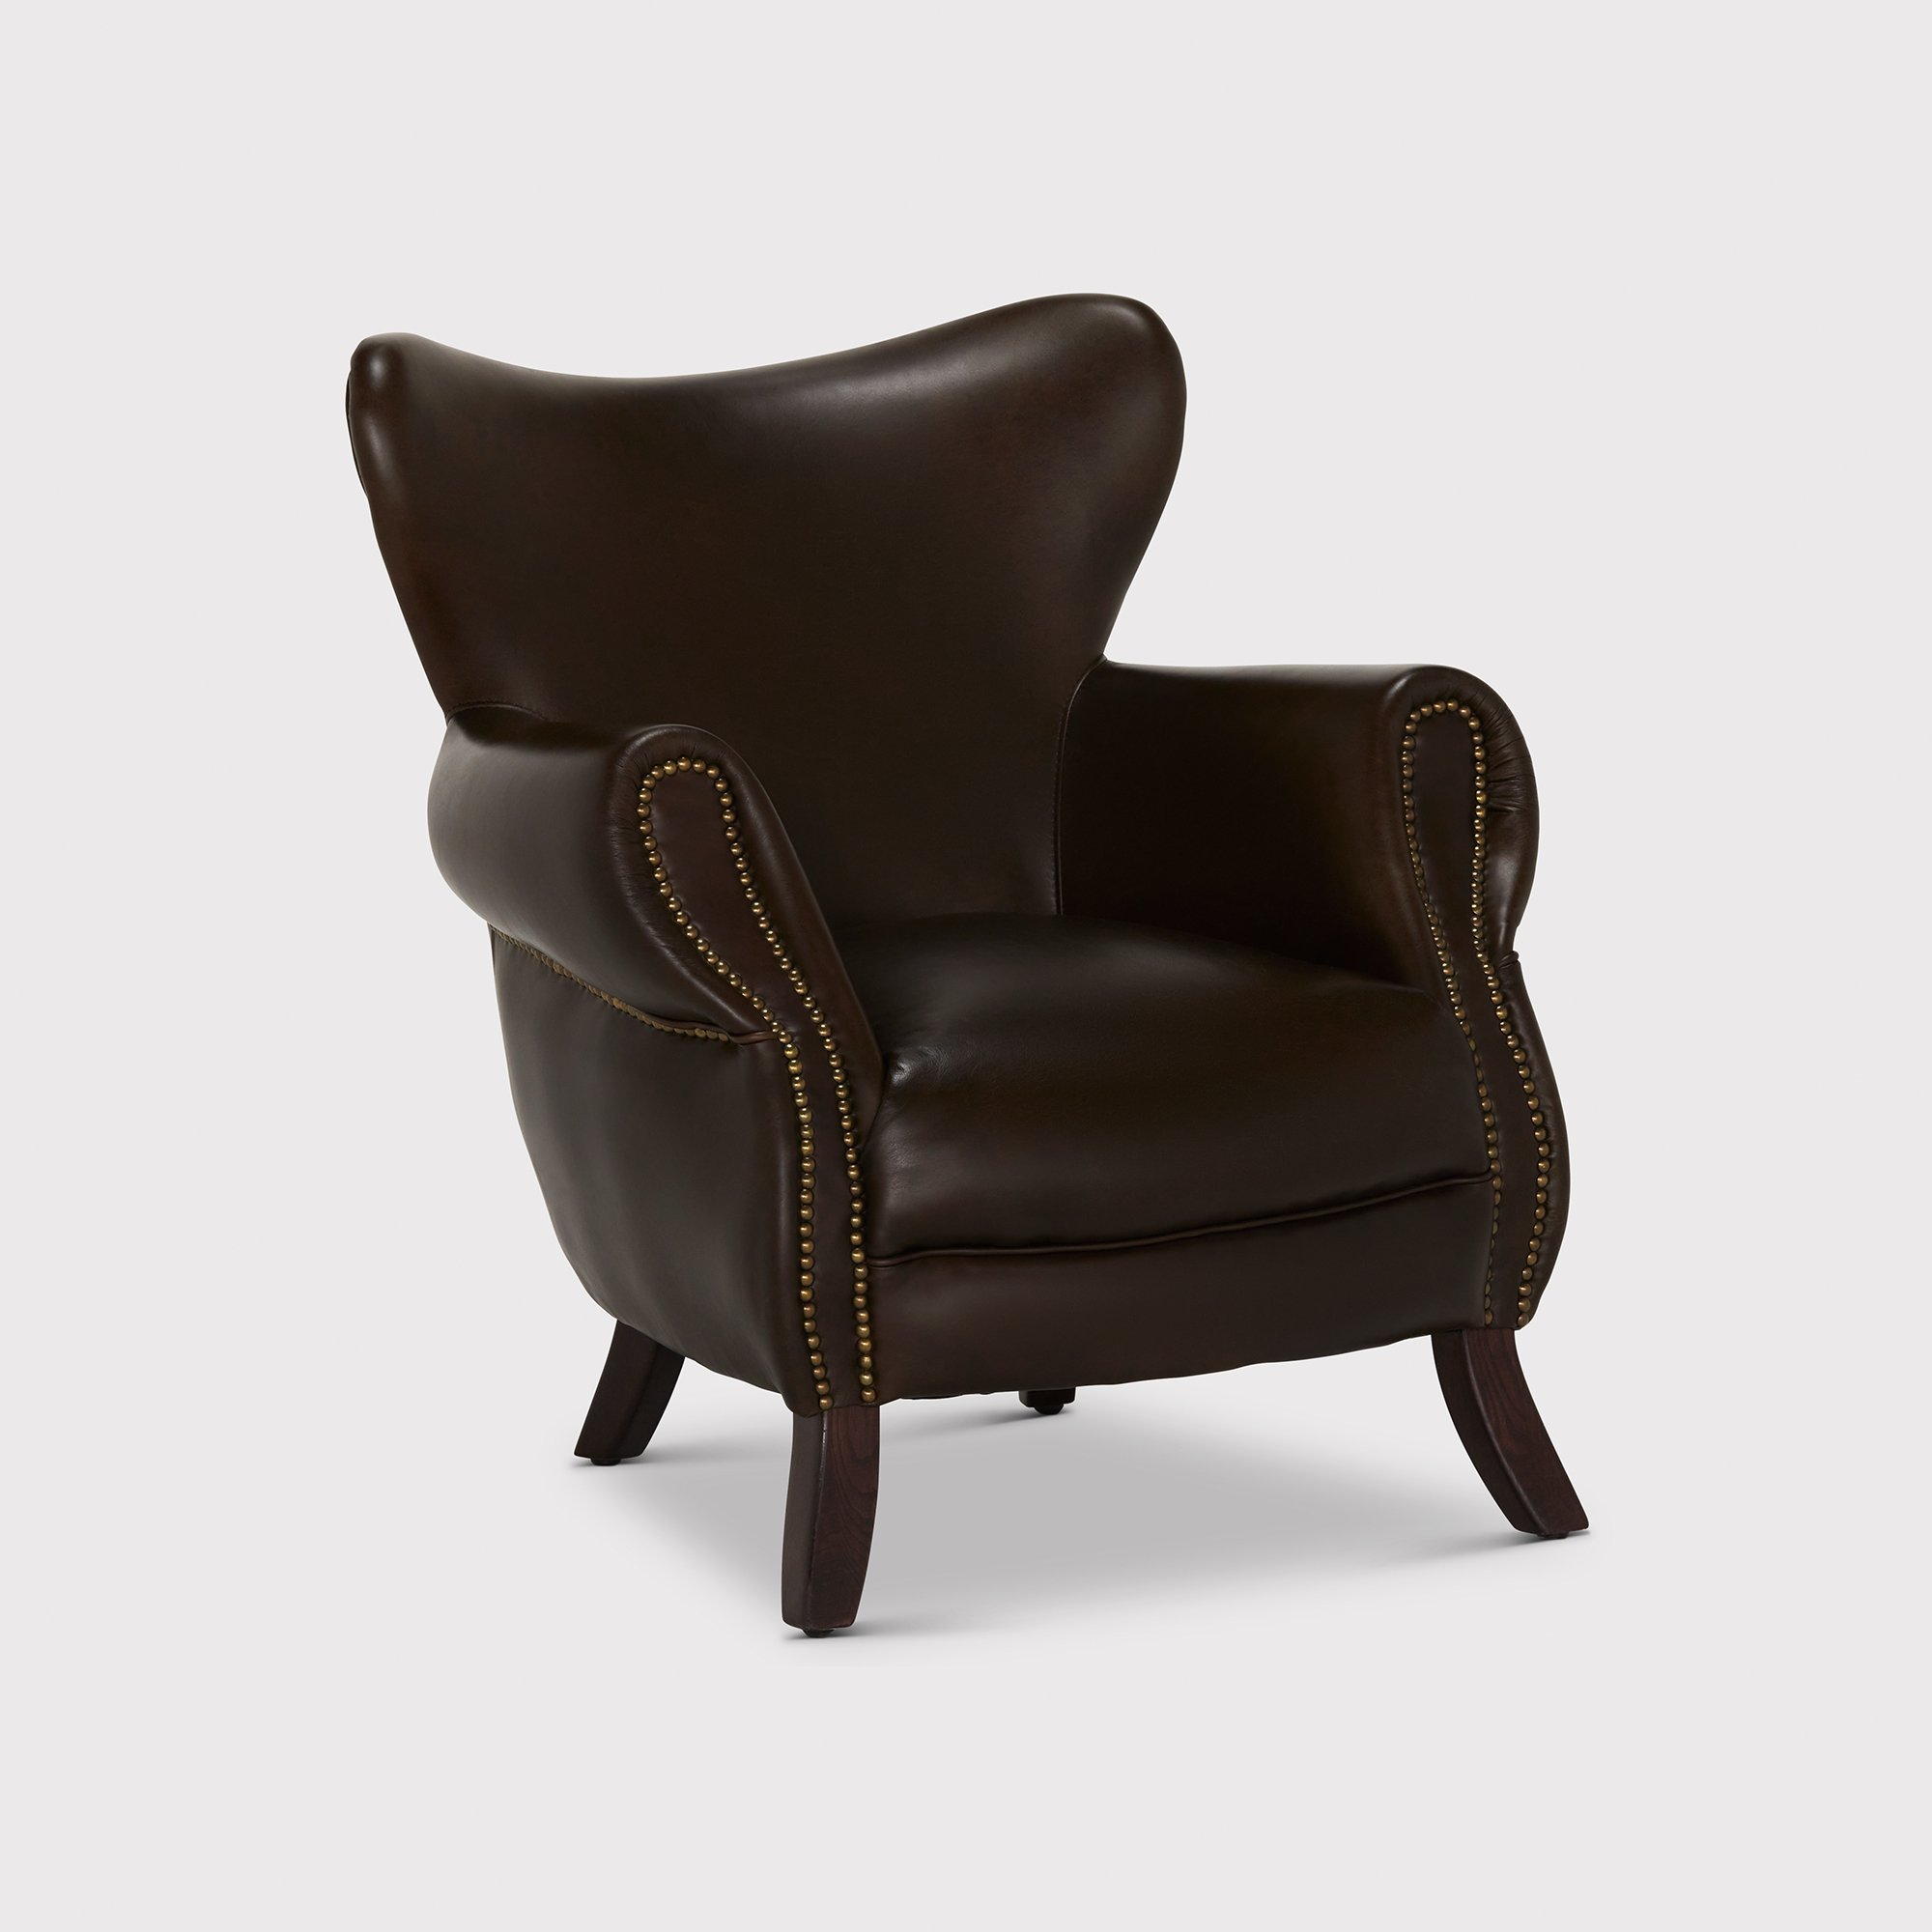 Timothy Oulton Scholar Armchair, Brown Leather | Barker & Stonehouse